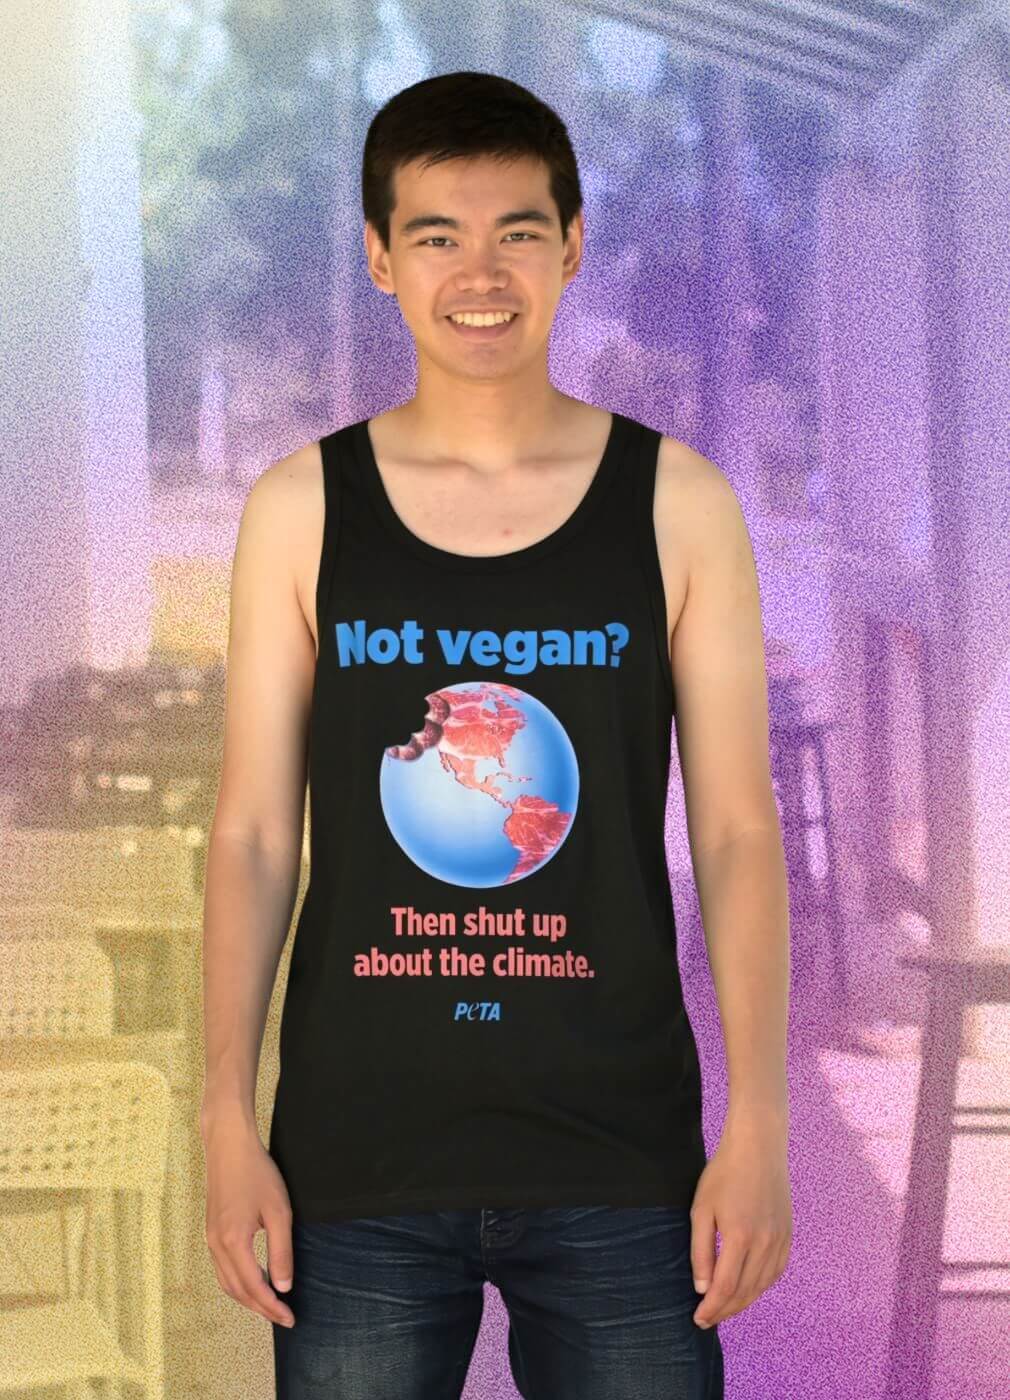 PETA shop tank about going vegan if you care about climate change